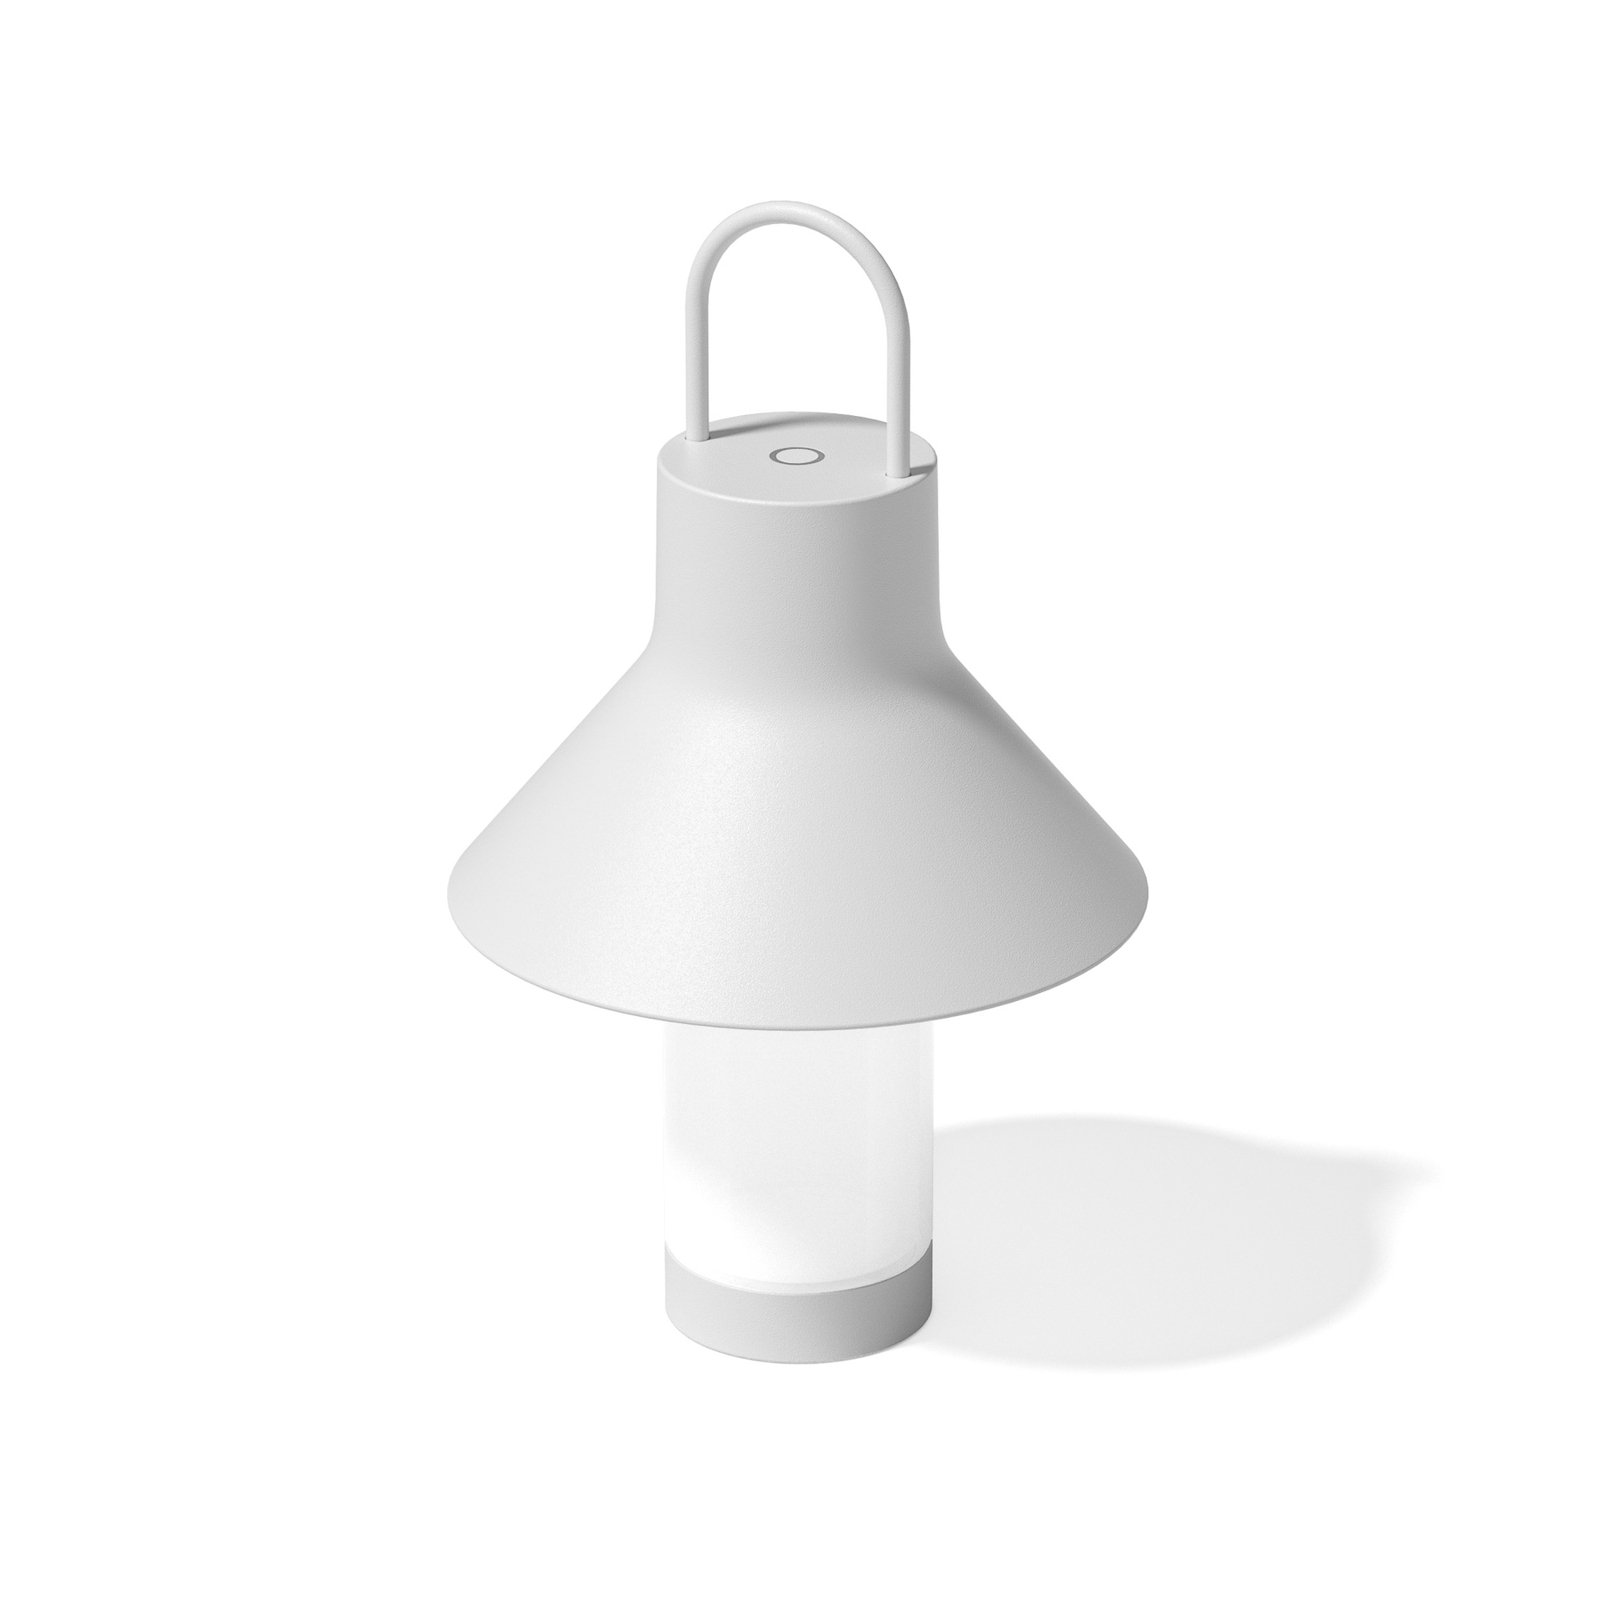 LOOM DESIGN lampe de table LED rechargeable Shadow Small, blanc, IP65